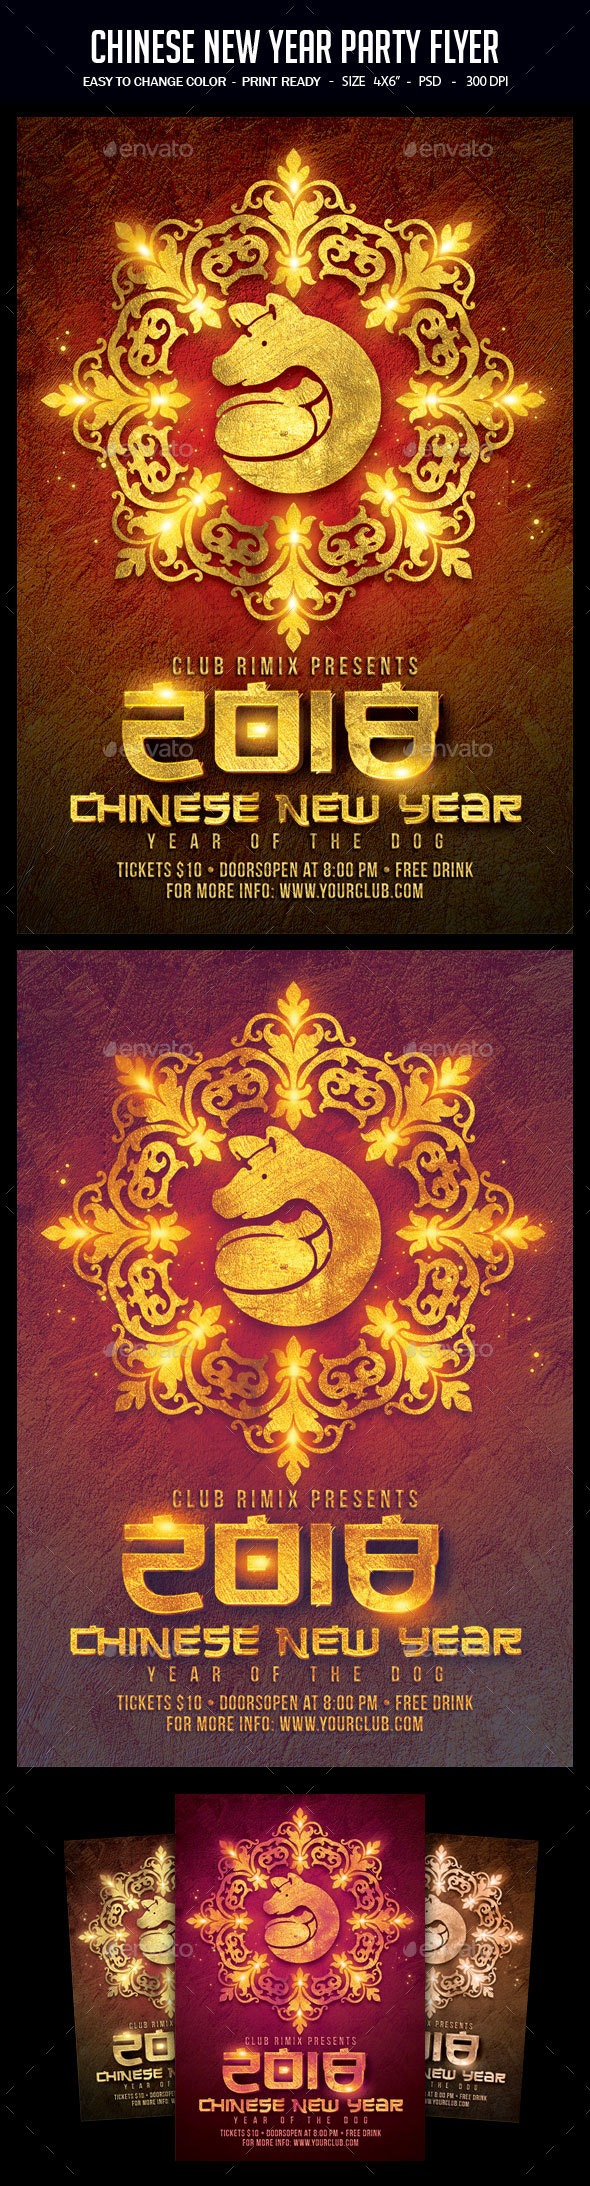 Print Template - GraphicRiver Chinese New Year Party Flyer ...